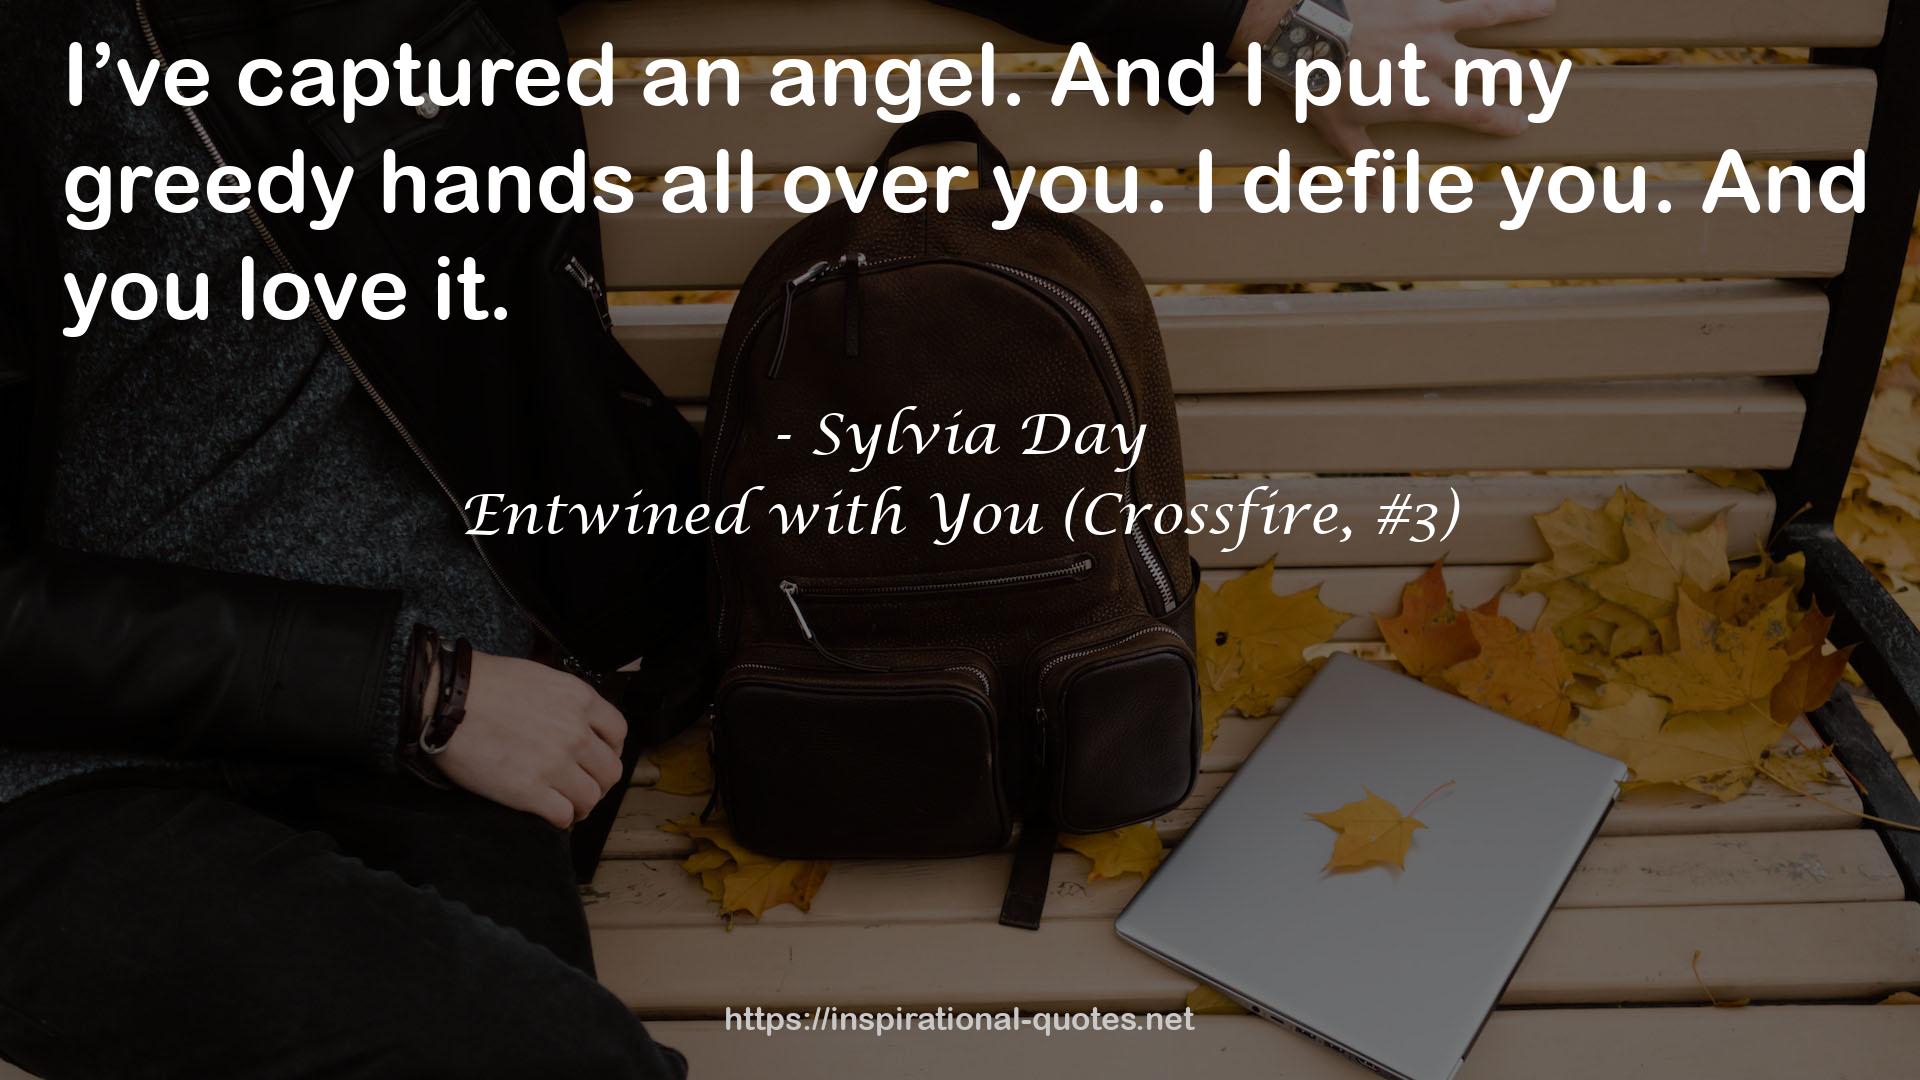 Entwined with You (Crossfire, #3) QUOTES